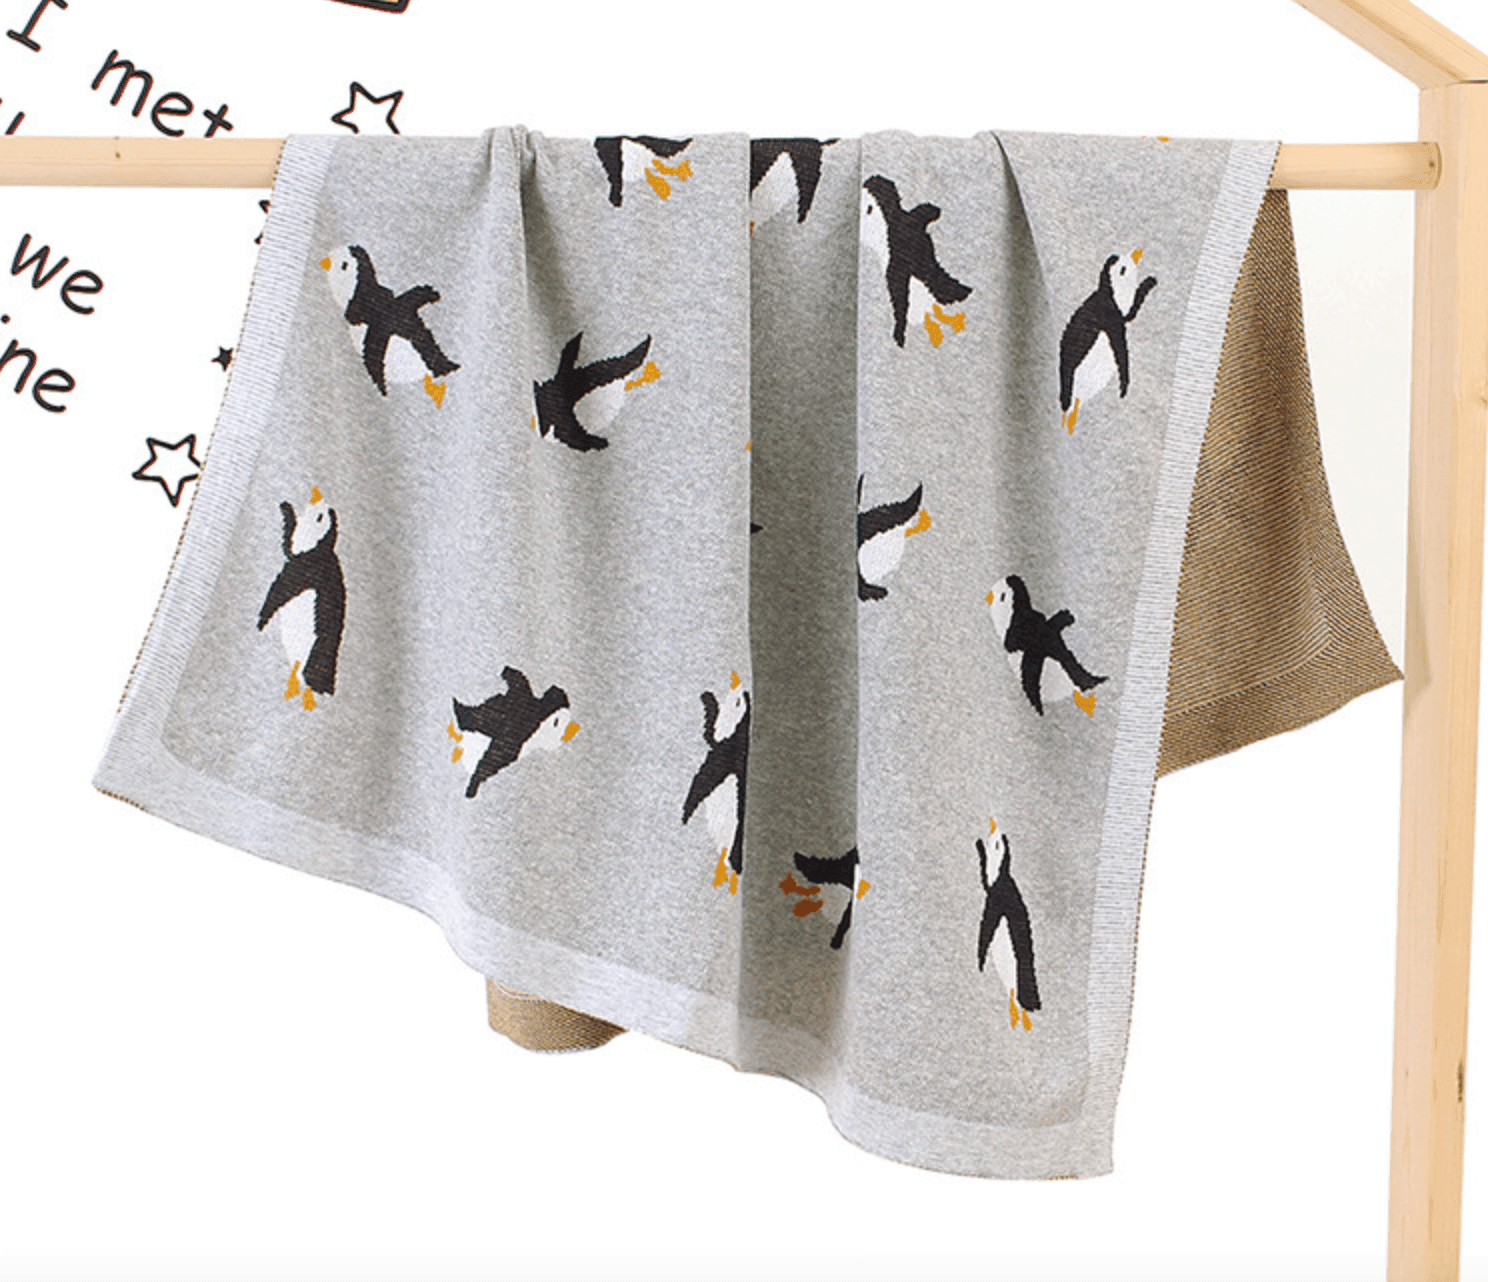 100% Cotton Super Soft Baby Knitted Blanket - Penguin - Taylorson